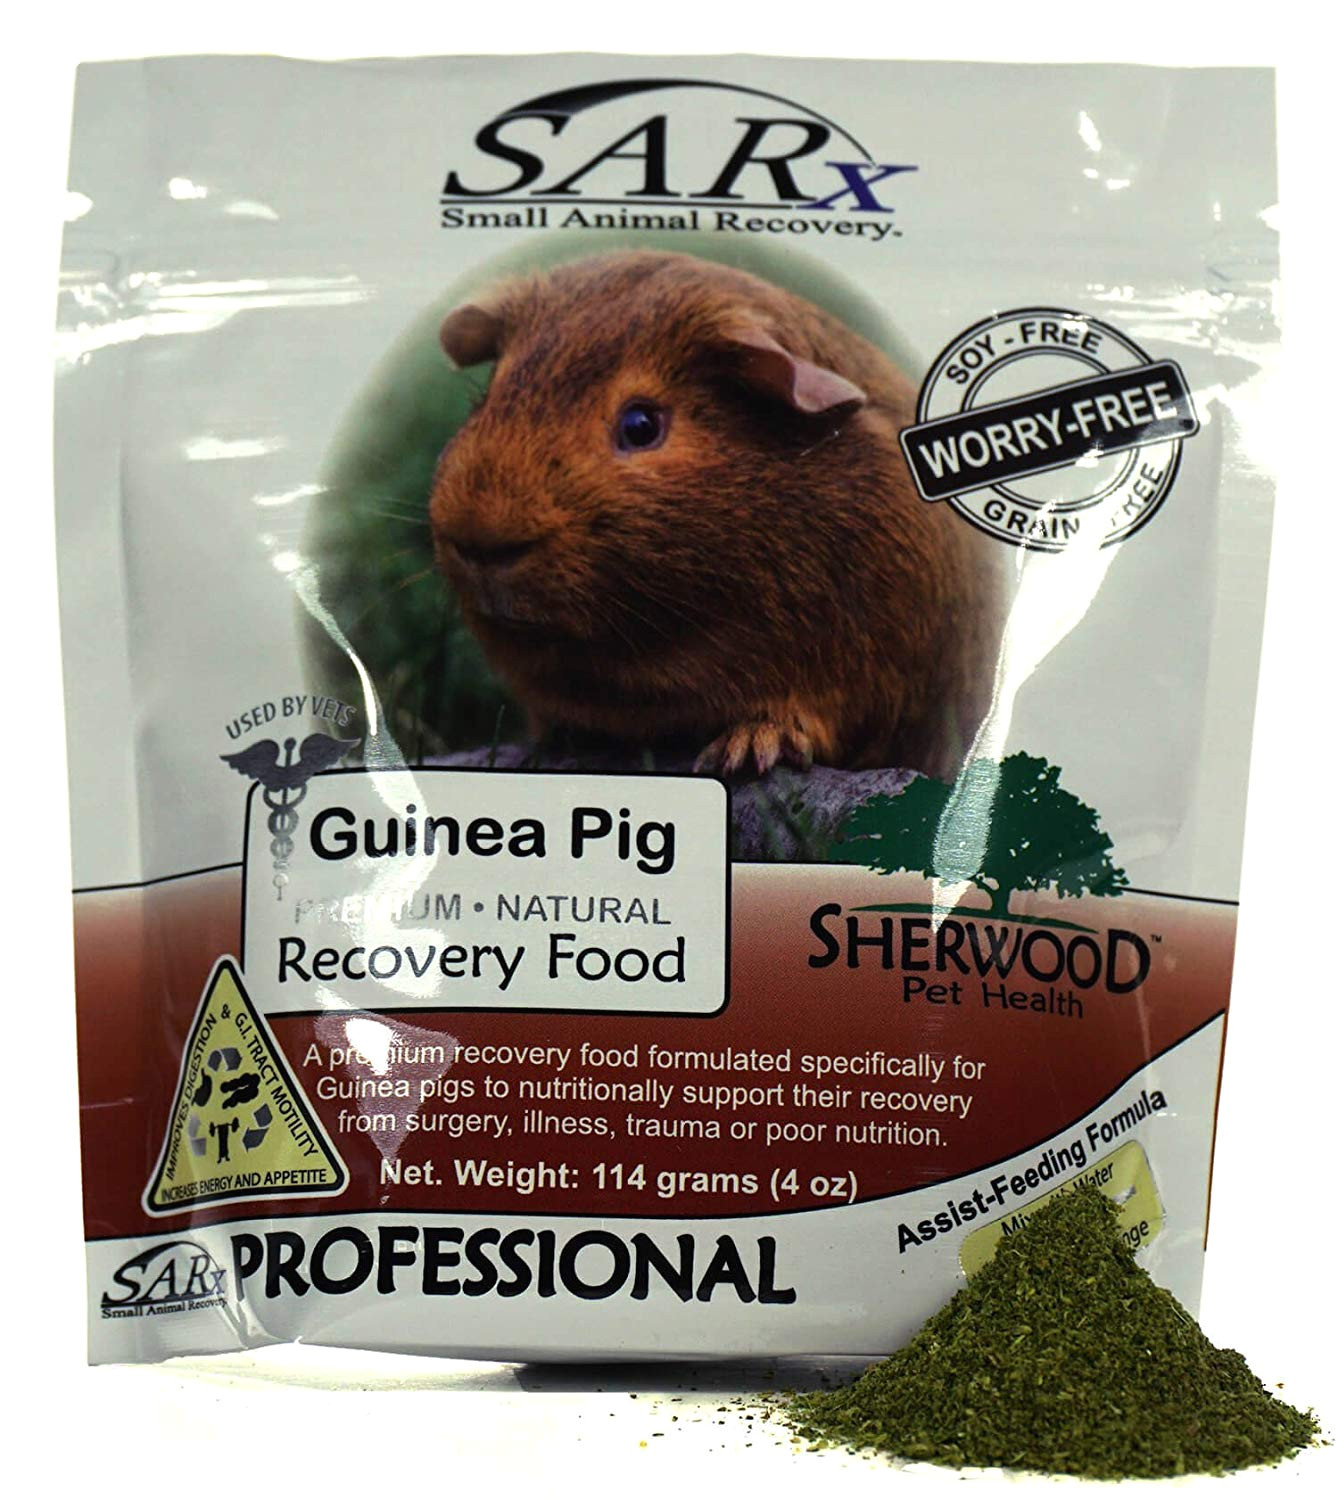 amazon com sherwood pet health recovery food for guinea pigs sarx soy grain free compare to critical care 114 grams pet supplies